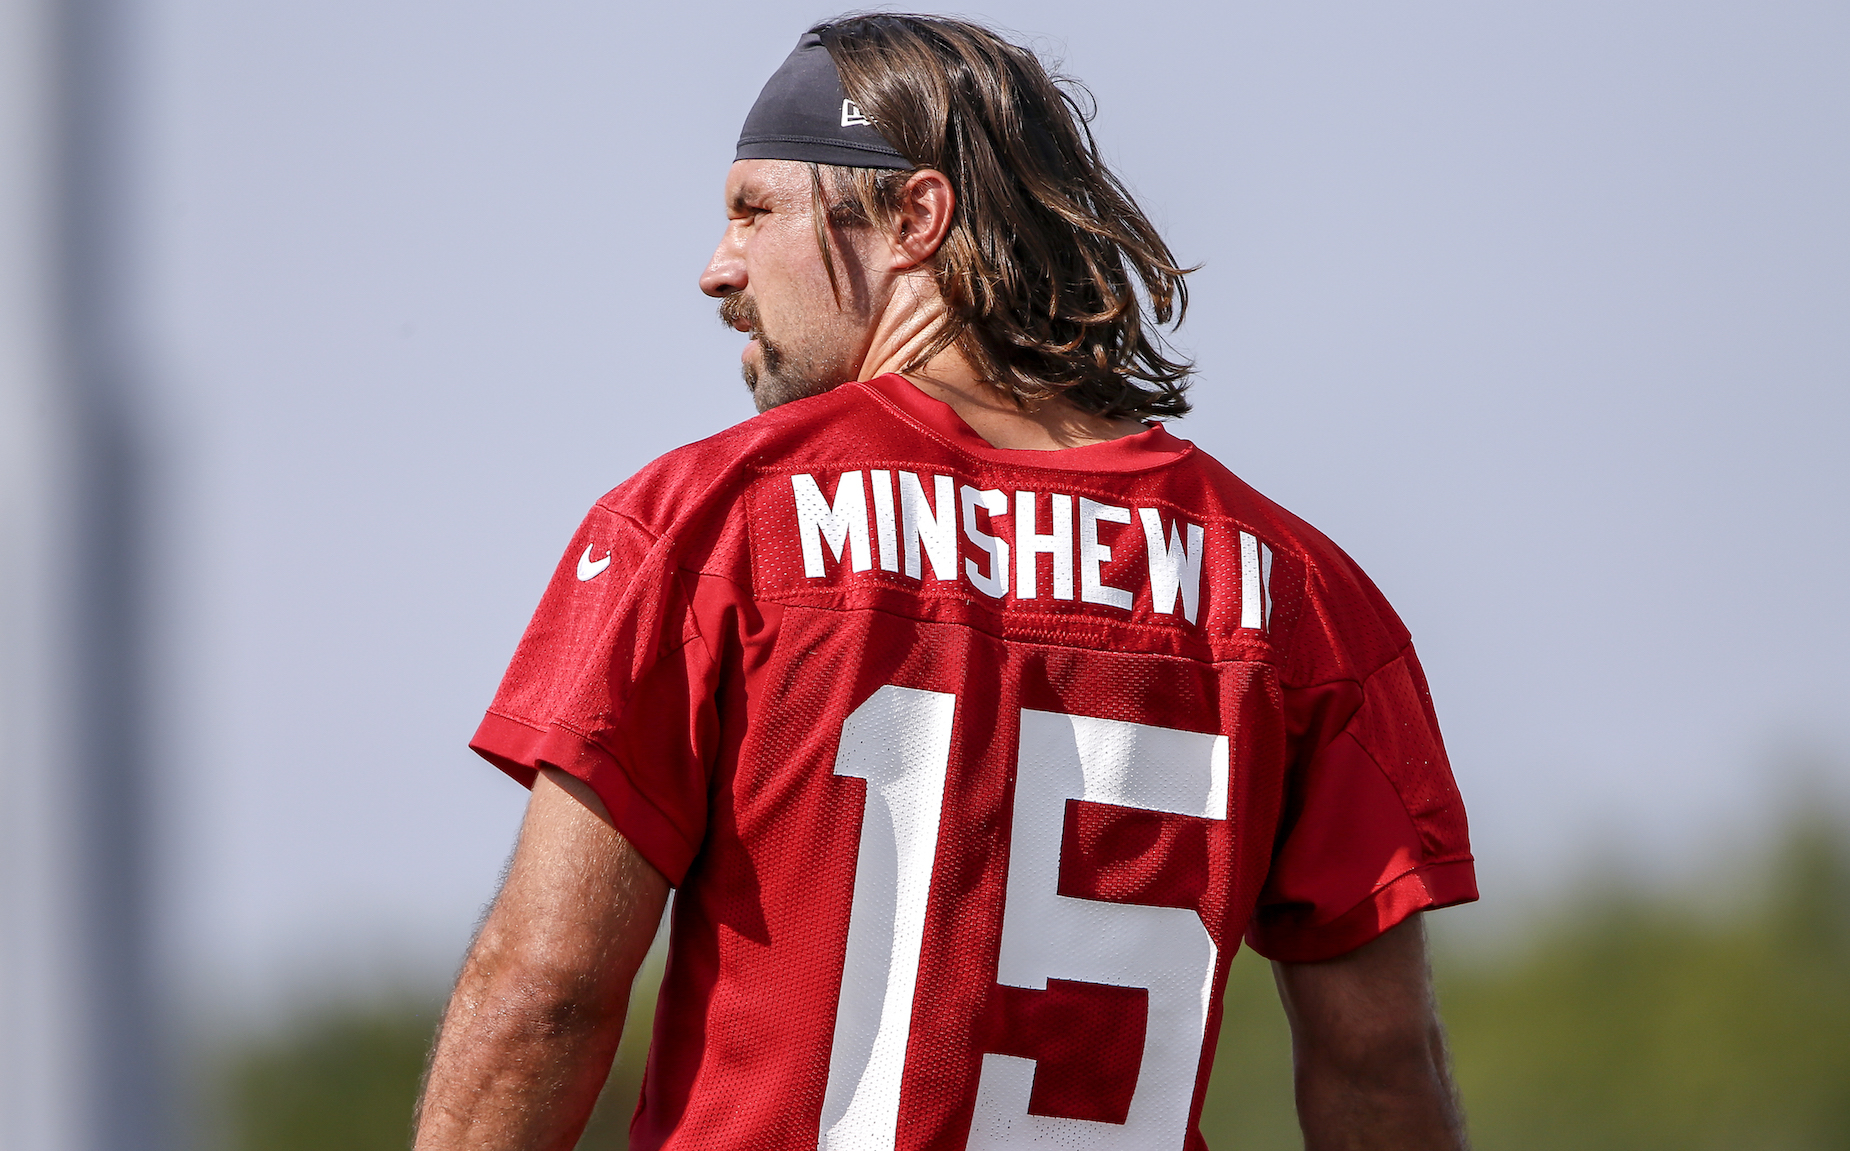 Jaguars quarterback Gardner Minshew may be known for many things, but spending money isn't one of them.